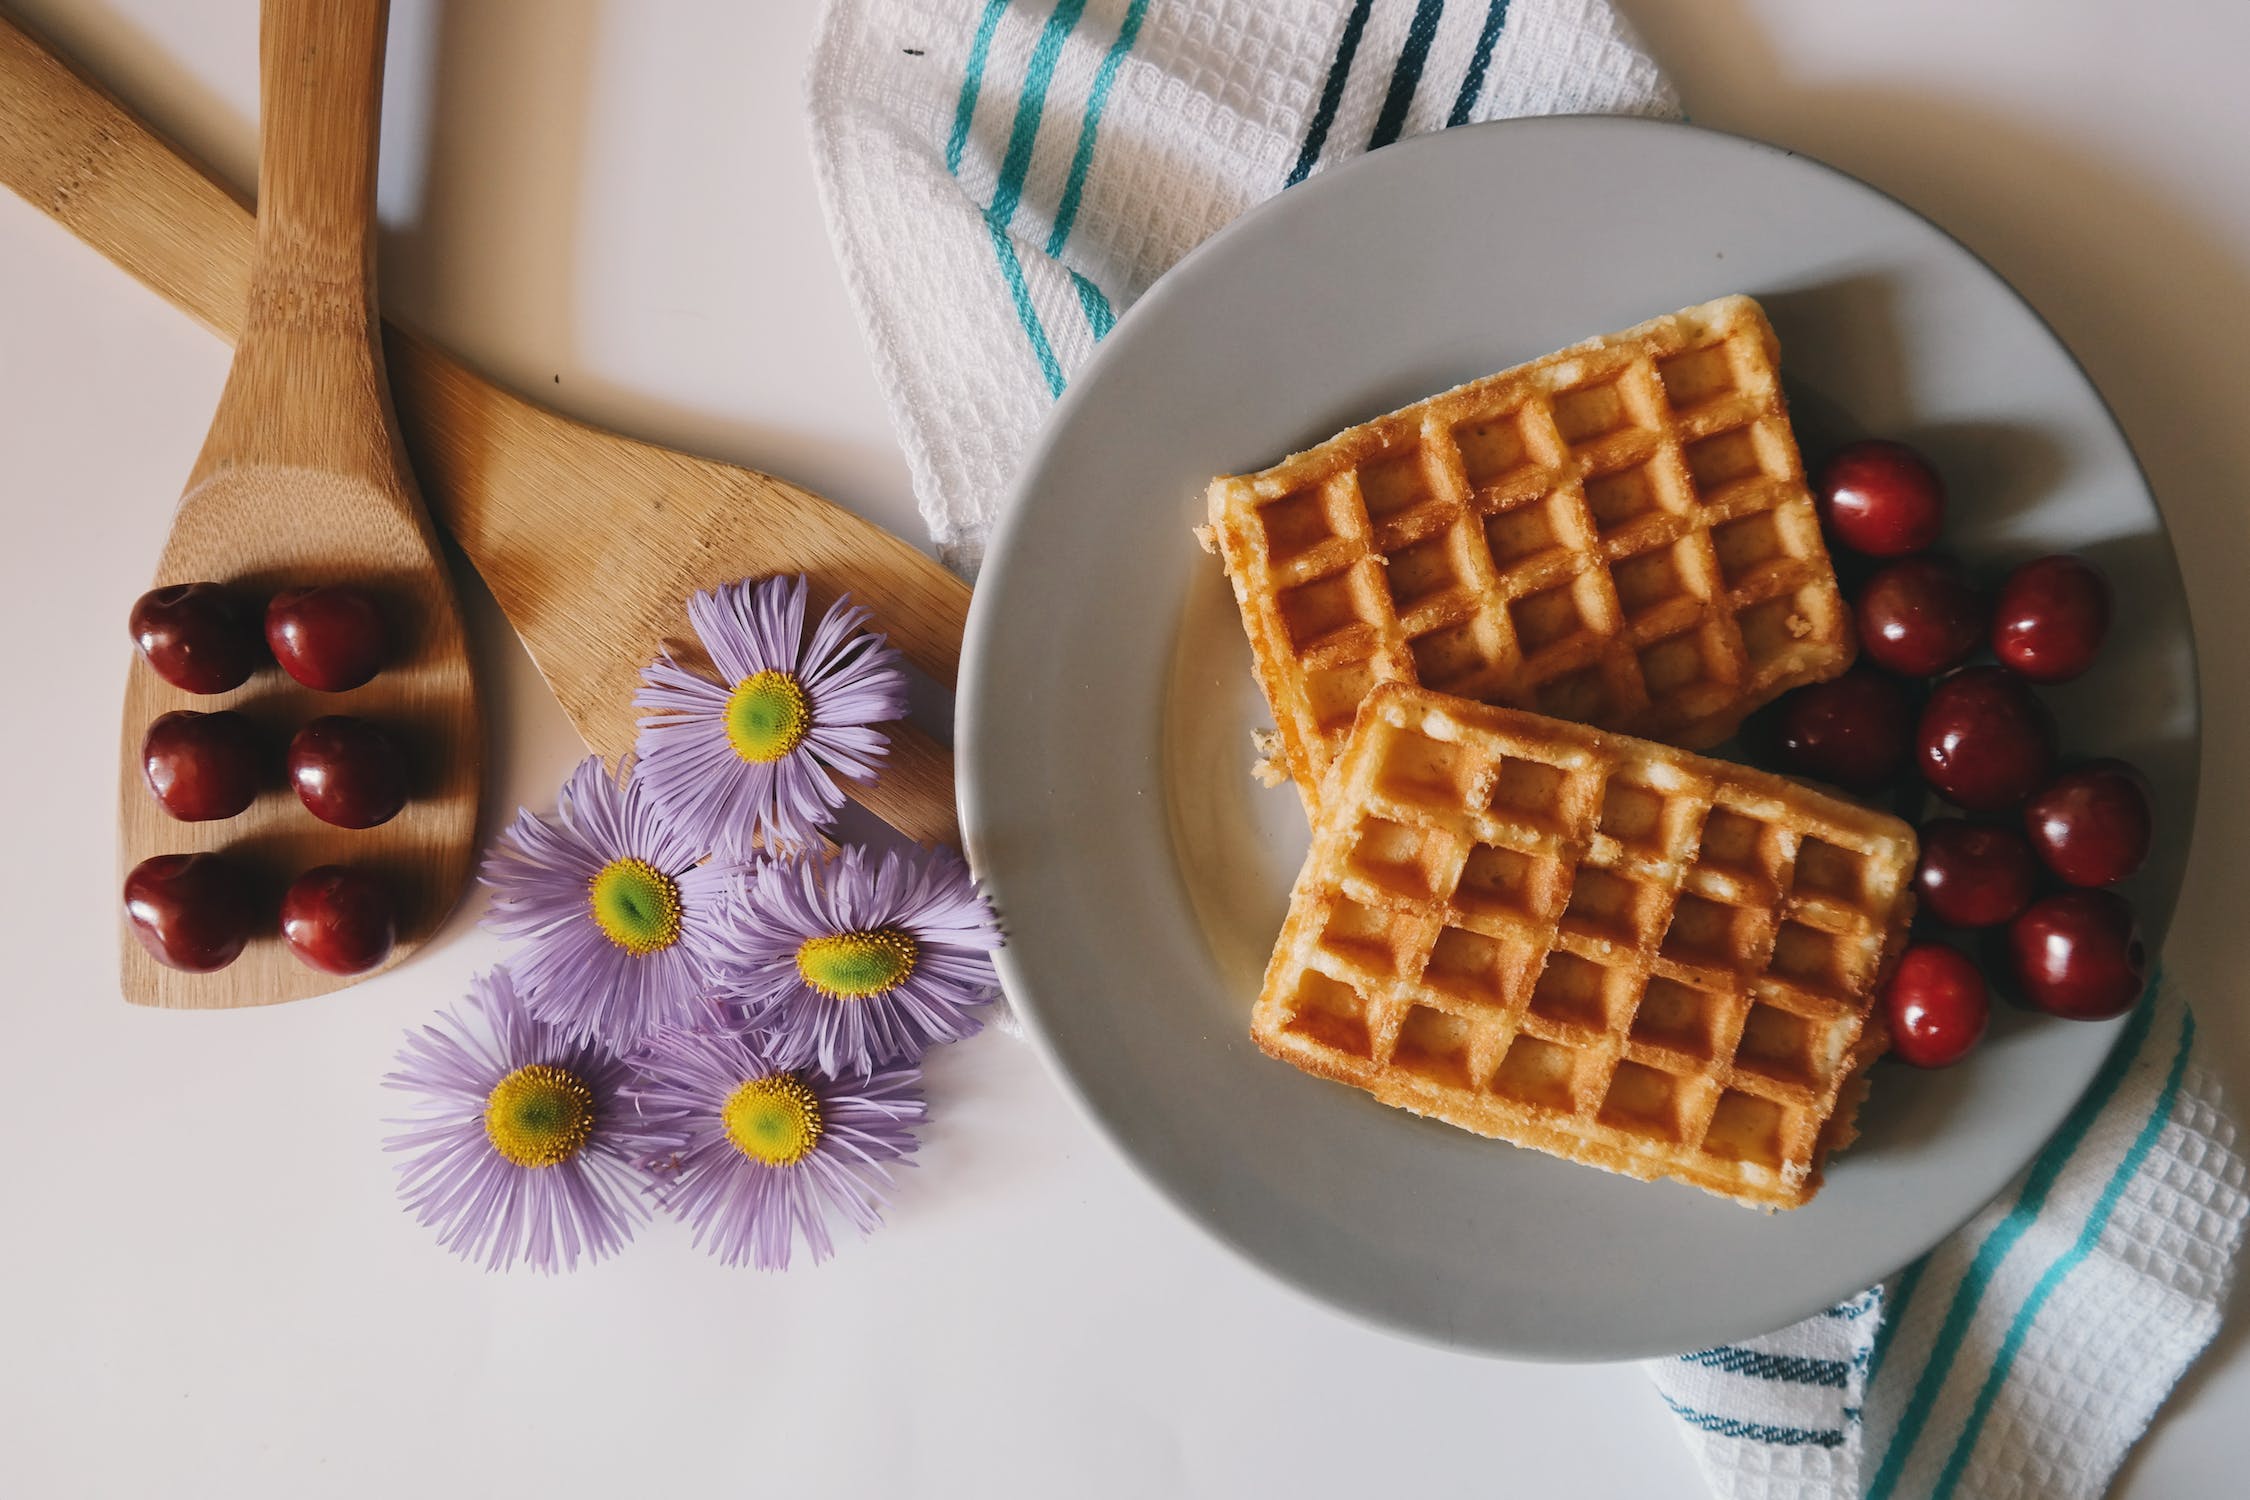 7 Best Non Toxic Waffle Makers To Make The Most Delicious Waffles Ever